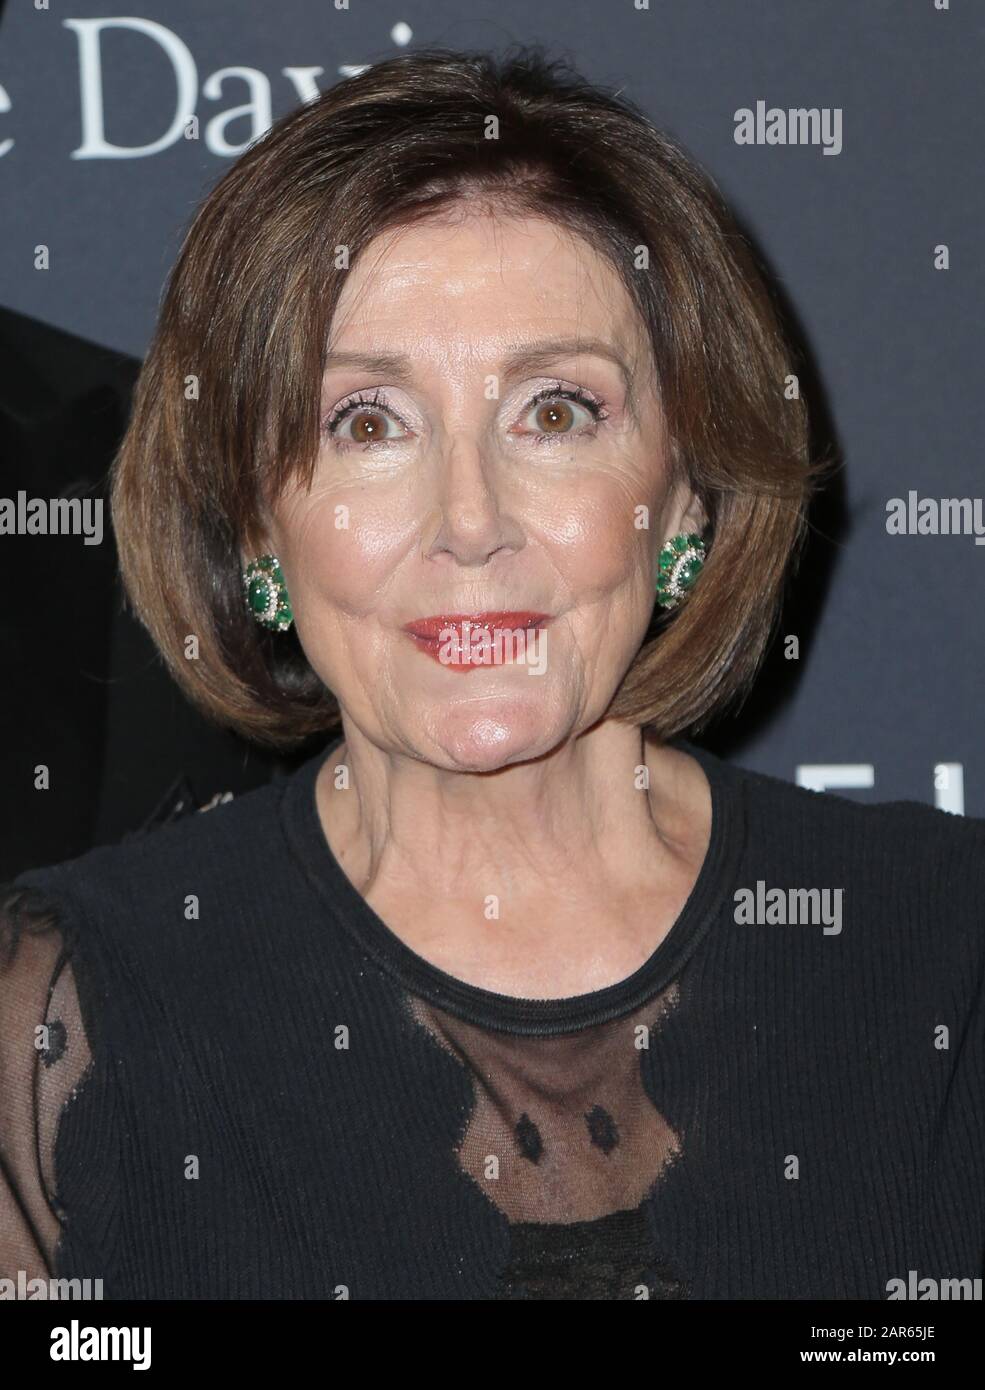 Nancy Pelosi walking the red carpet at the Clive Davis' 2020 Pre-Grammy Gala held at The Beverly Hilton Hotel on January 25, 2020 in Los Angeles, California USA (Photo by Parisa Afsahi/Sipa USA) Stock Photo